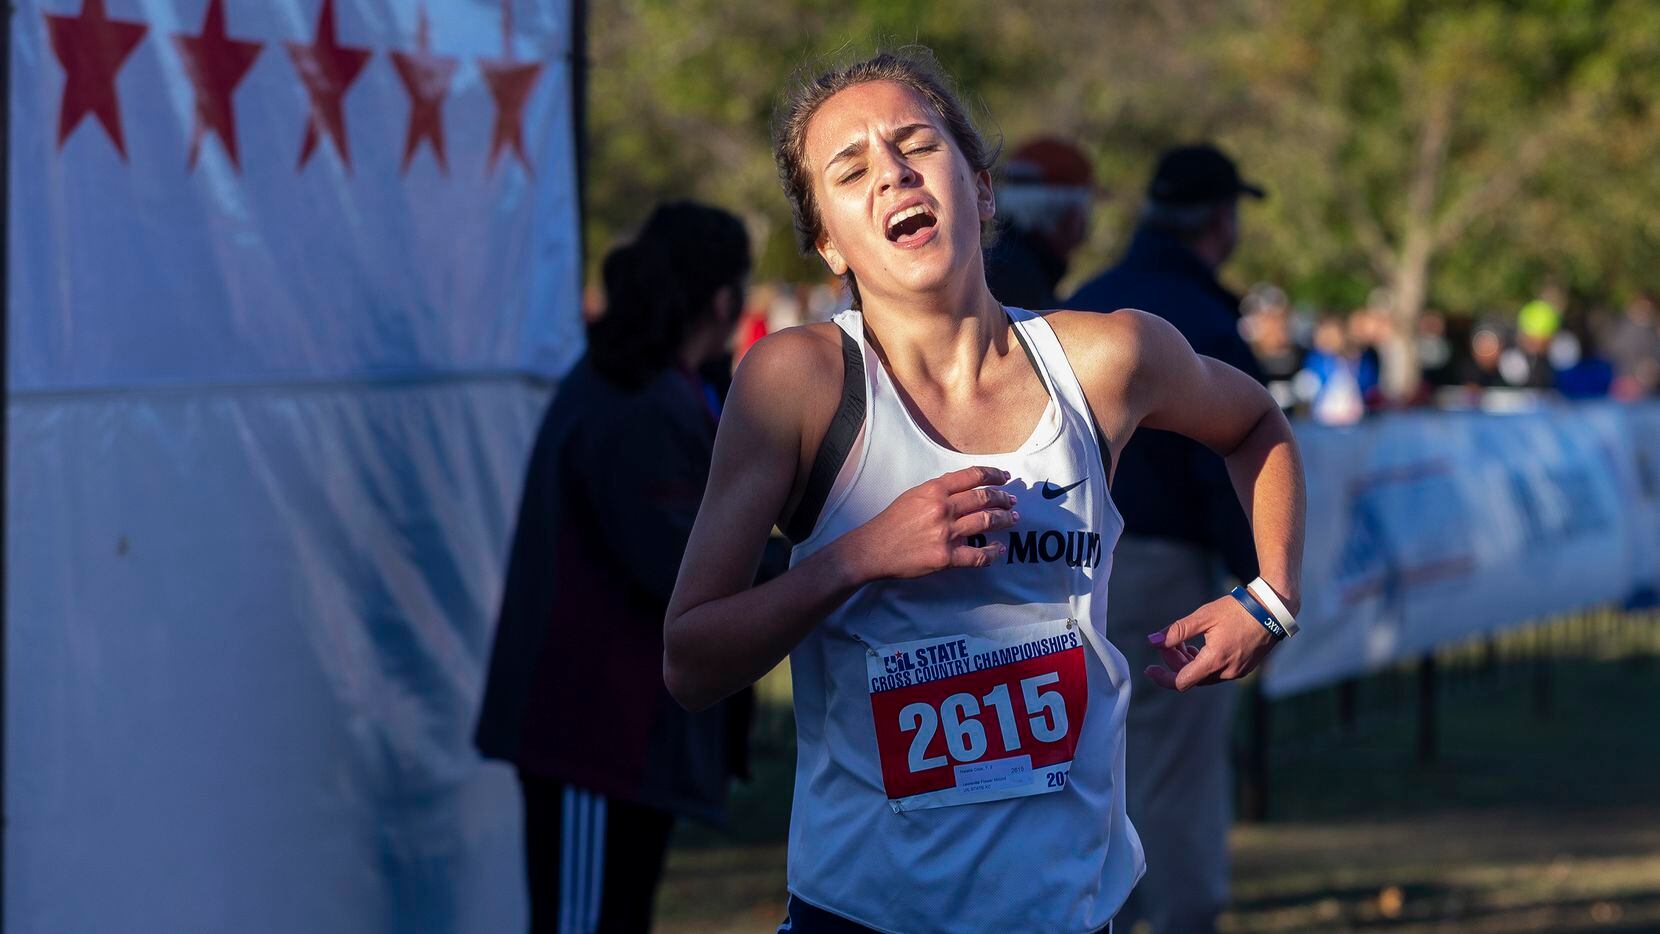 Flower Mound's Natalie Cook finishes fifth in the girls 6A UIL State Cross Country Championship in Round Rock, Saturday, Nov. 3, 2018. (Stephen Spillman/Special Contributor)